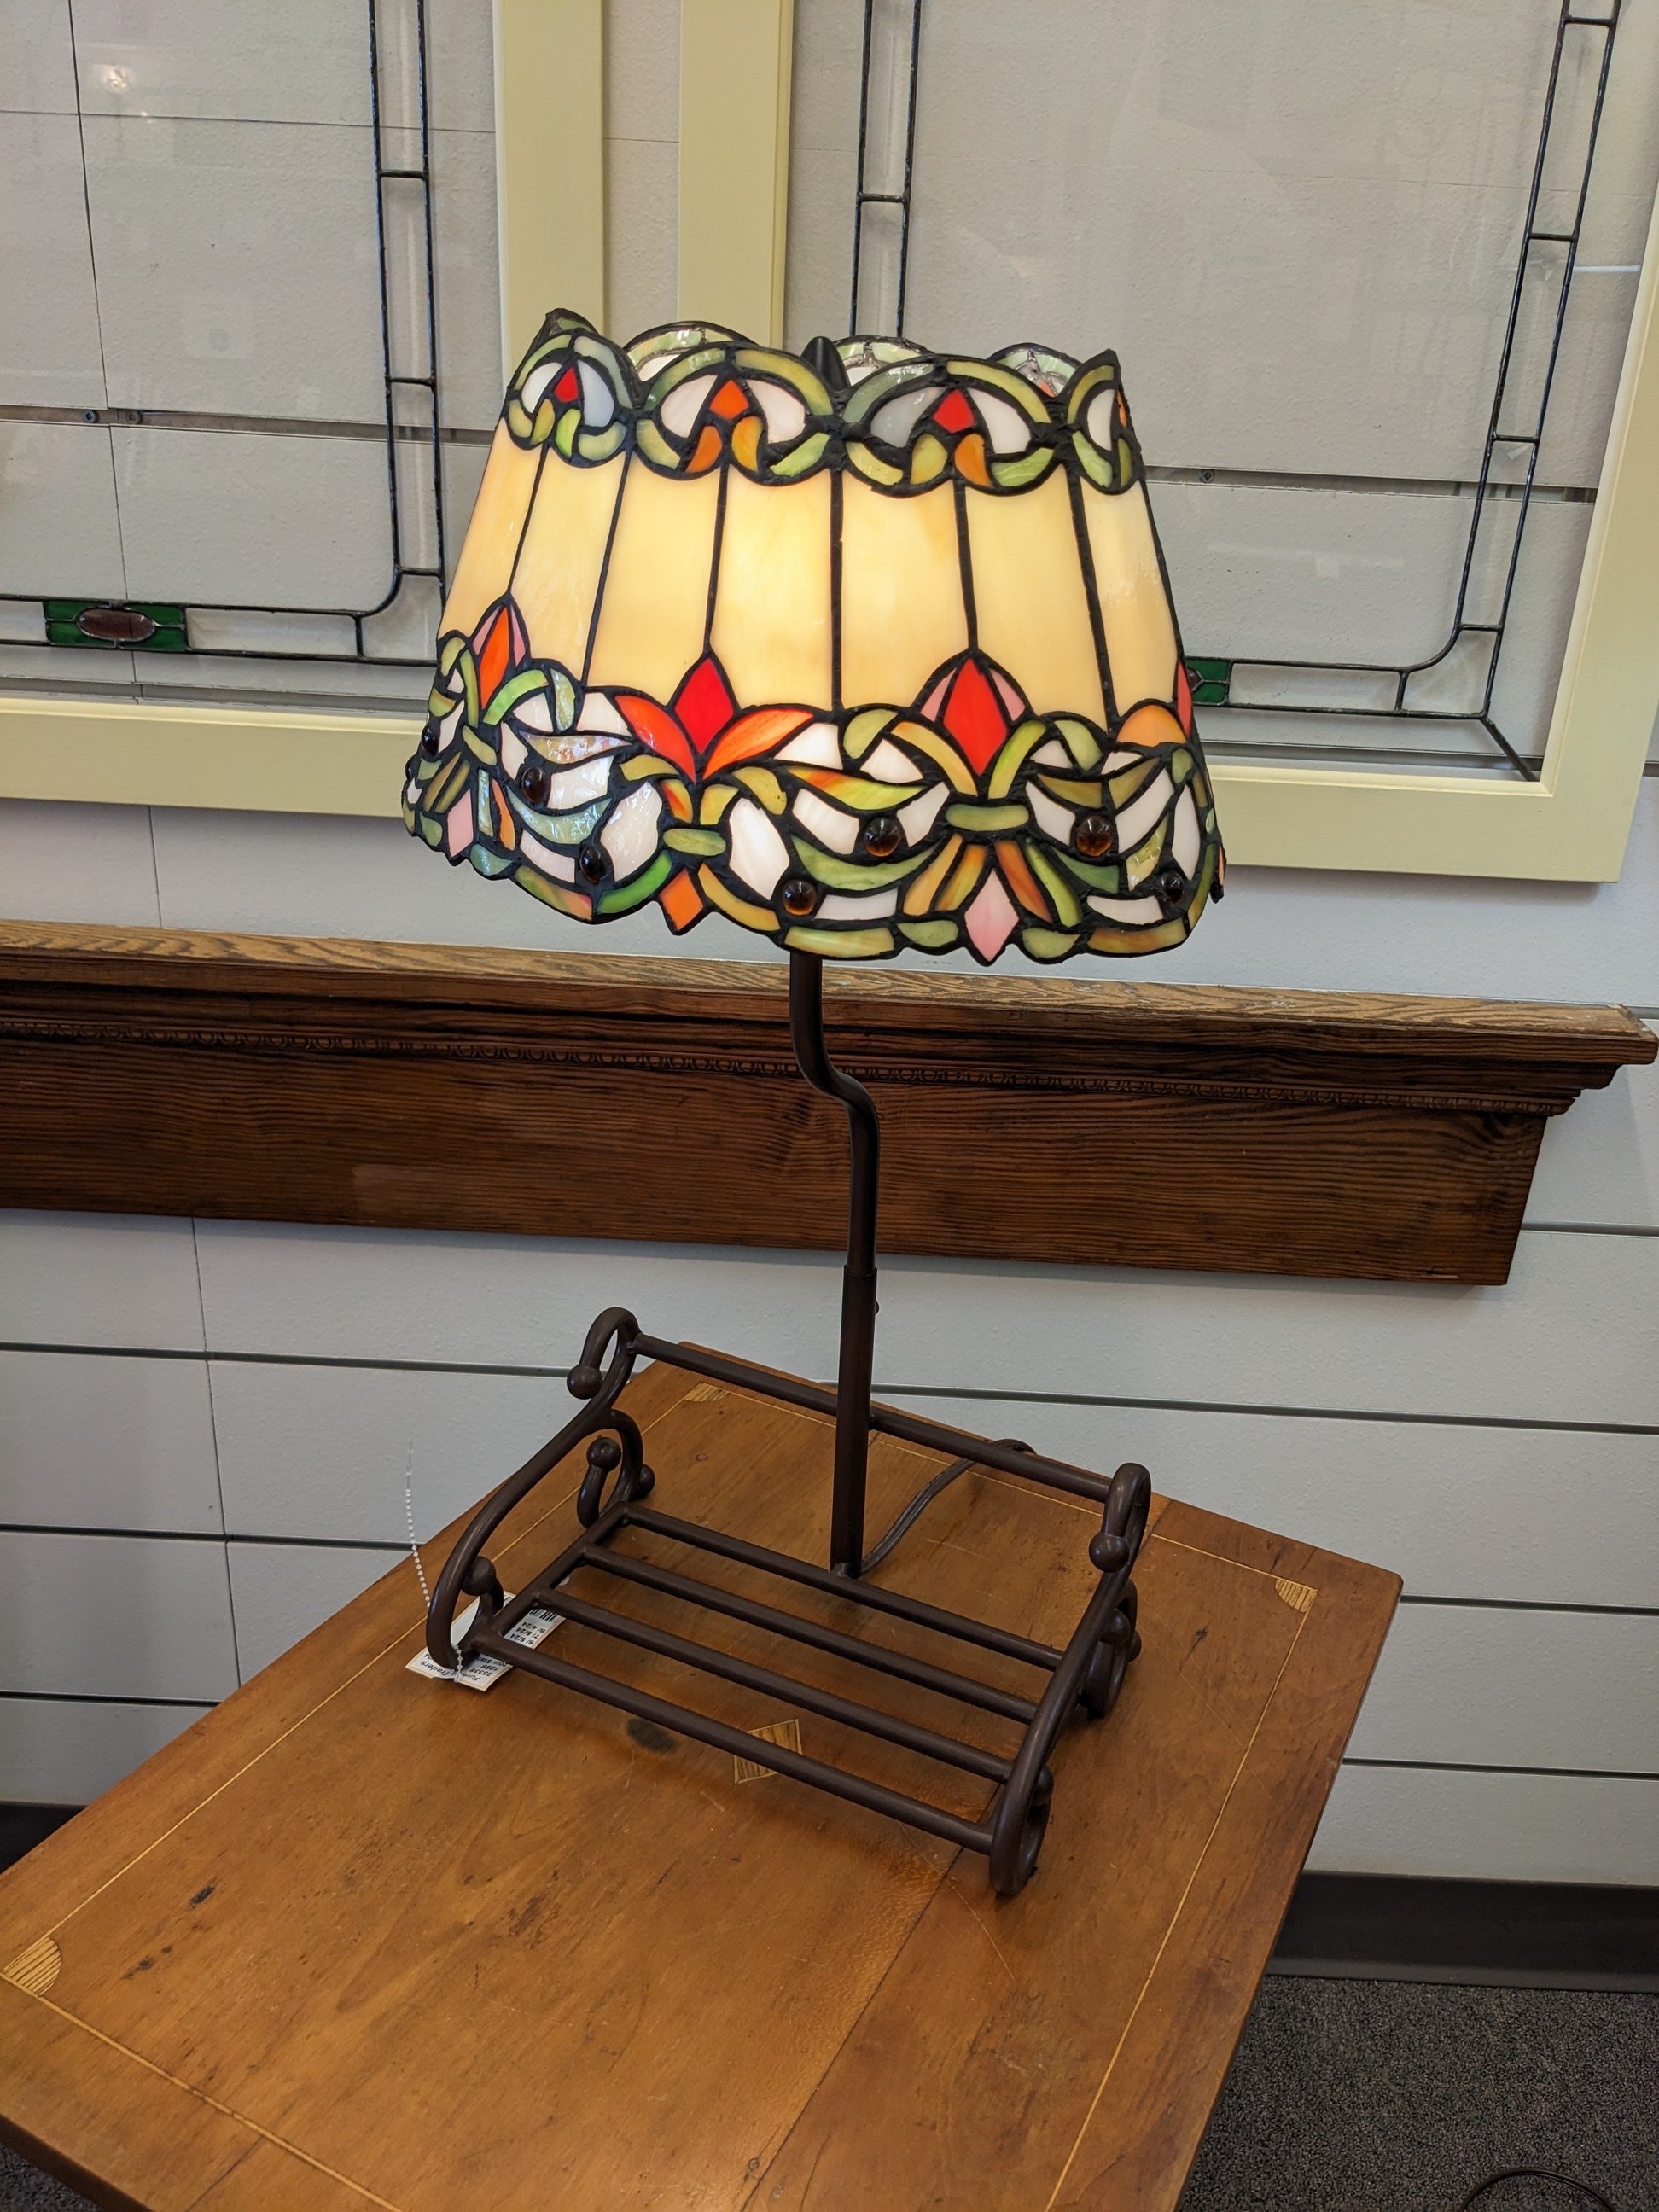 Stained Glass Lamp 20"